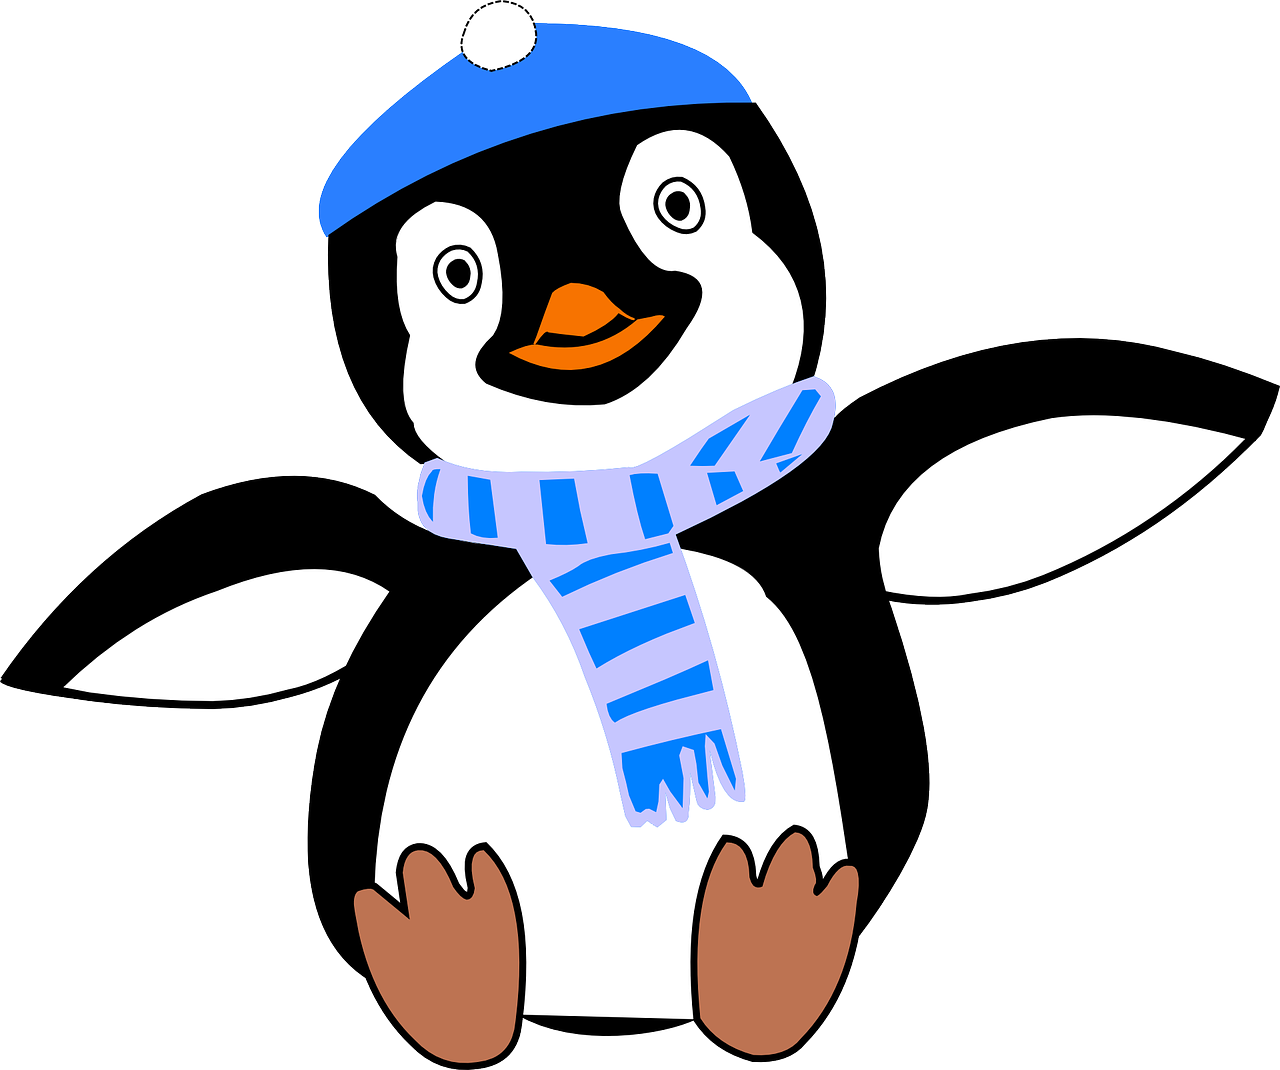 a penguin wearing a blue hat and scarf, an illustration of, figuration libre, his arms spread. ready to fly, clipart, seams, very handsome